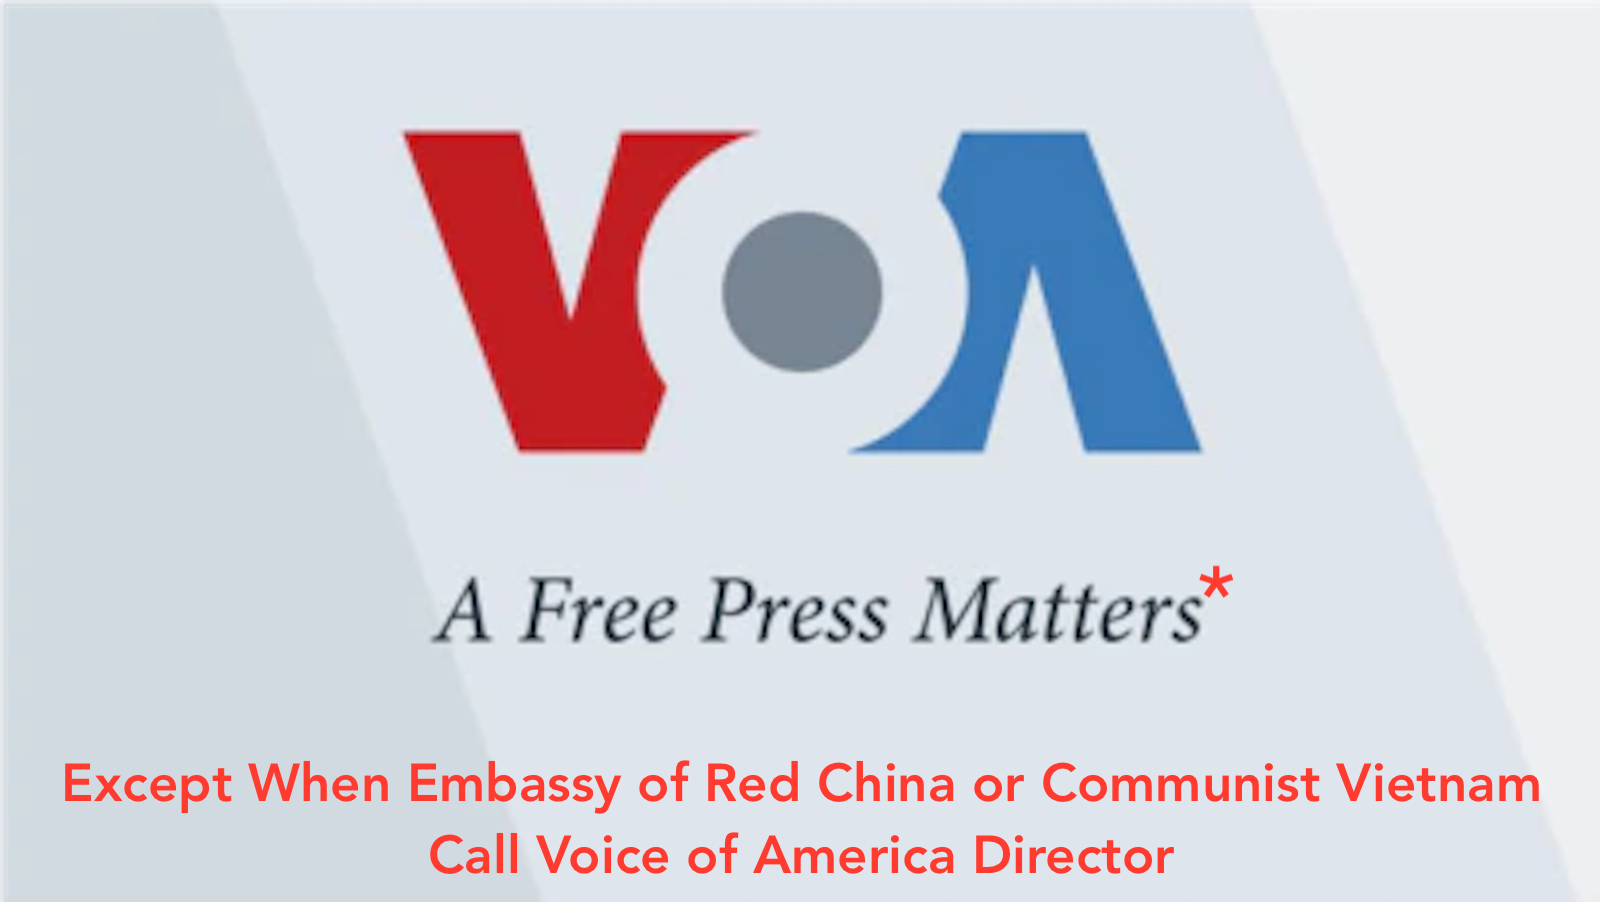 Voice of America – USAGM Management Censored News to Protect Communist Vietnam — Radio Free Asia Did Not